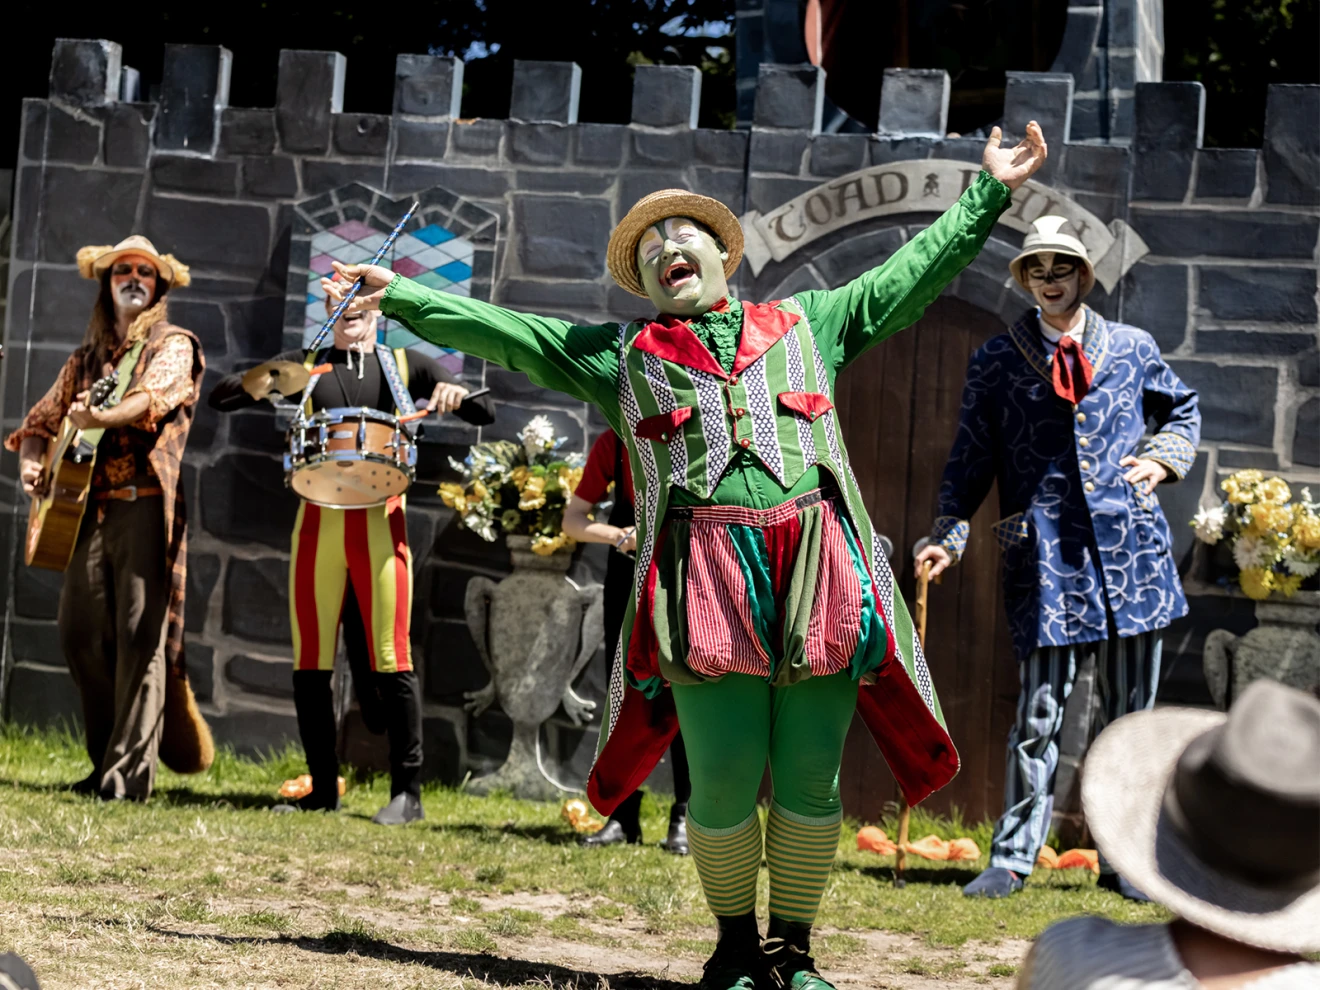 The Wind in the Willows presented by The Australian Shakespeare Company